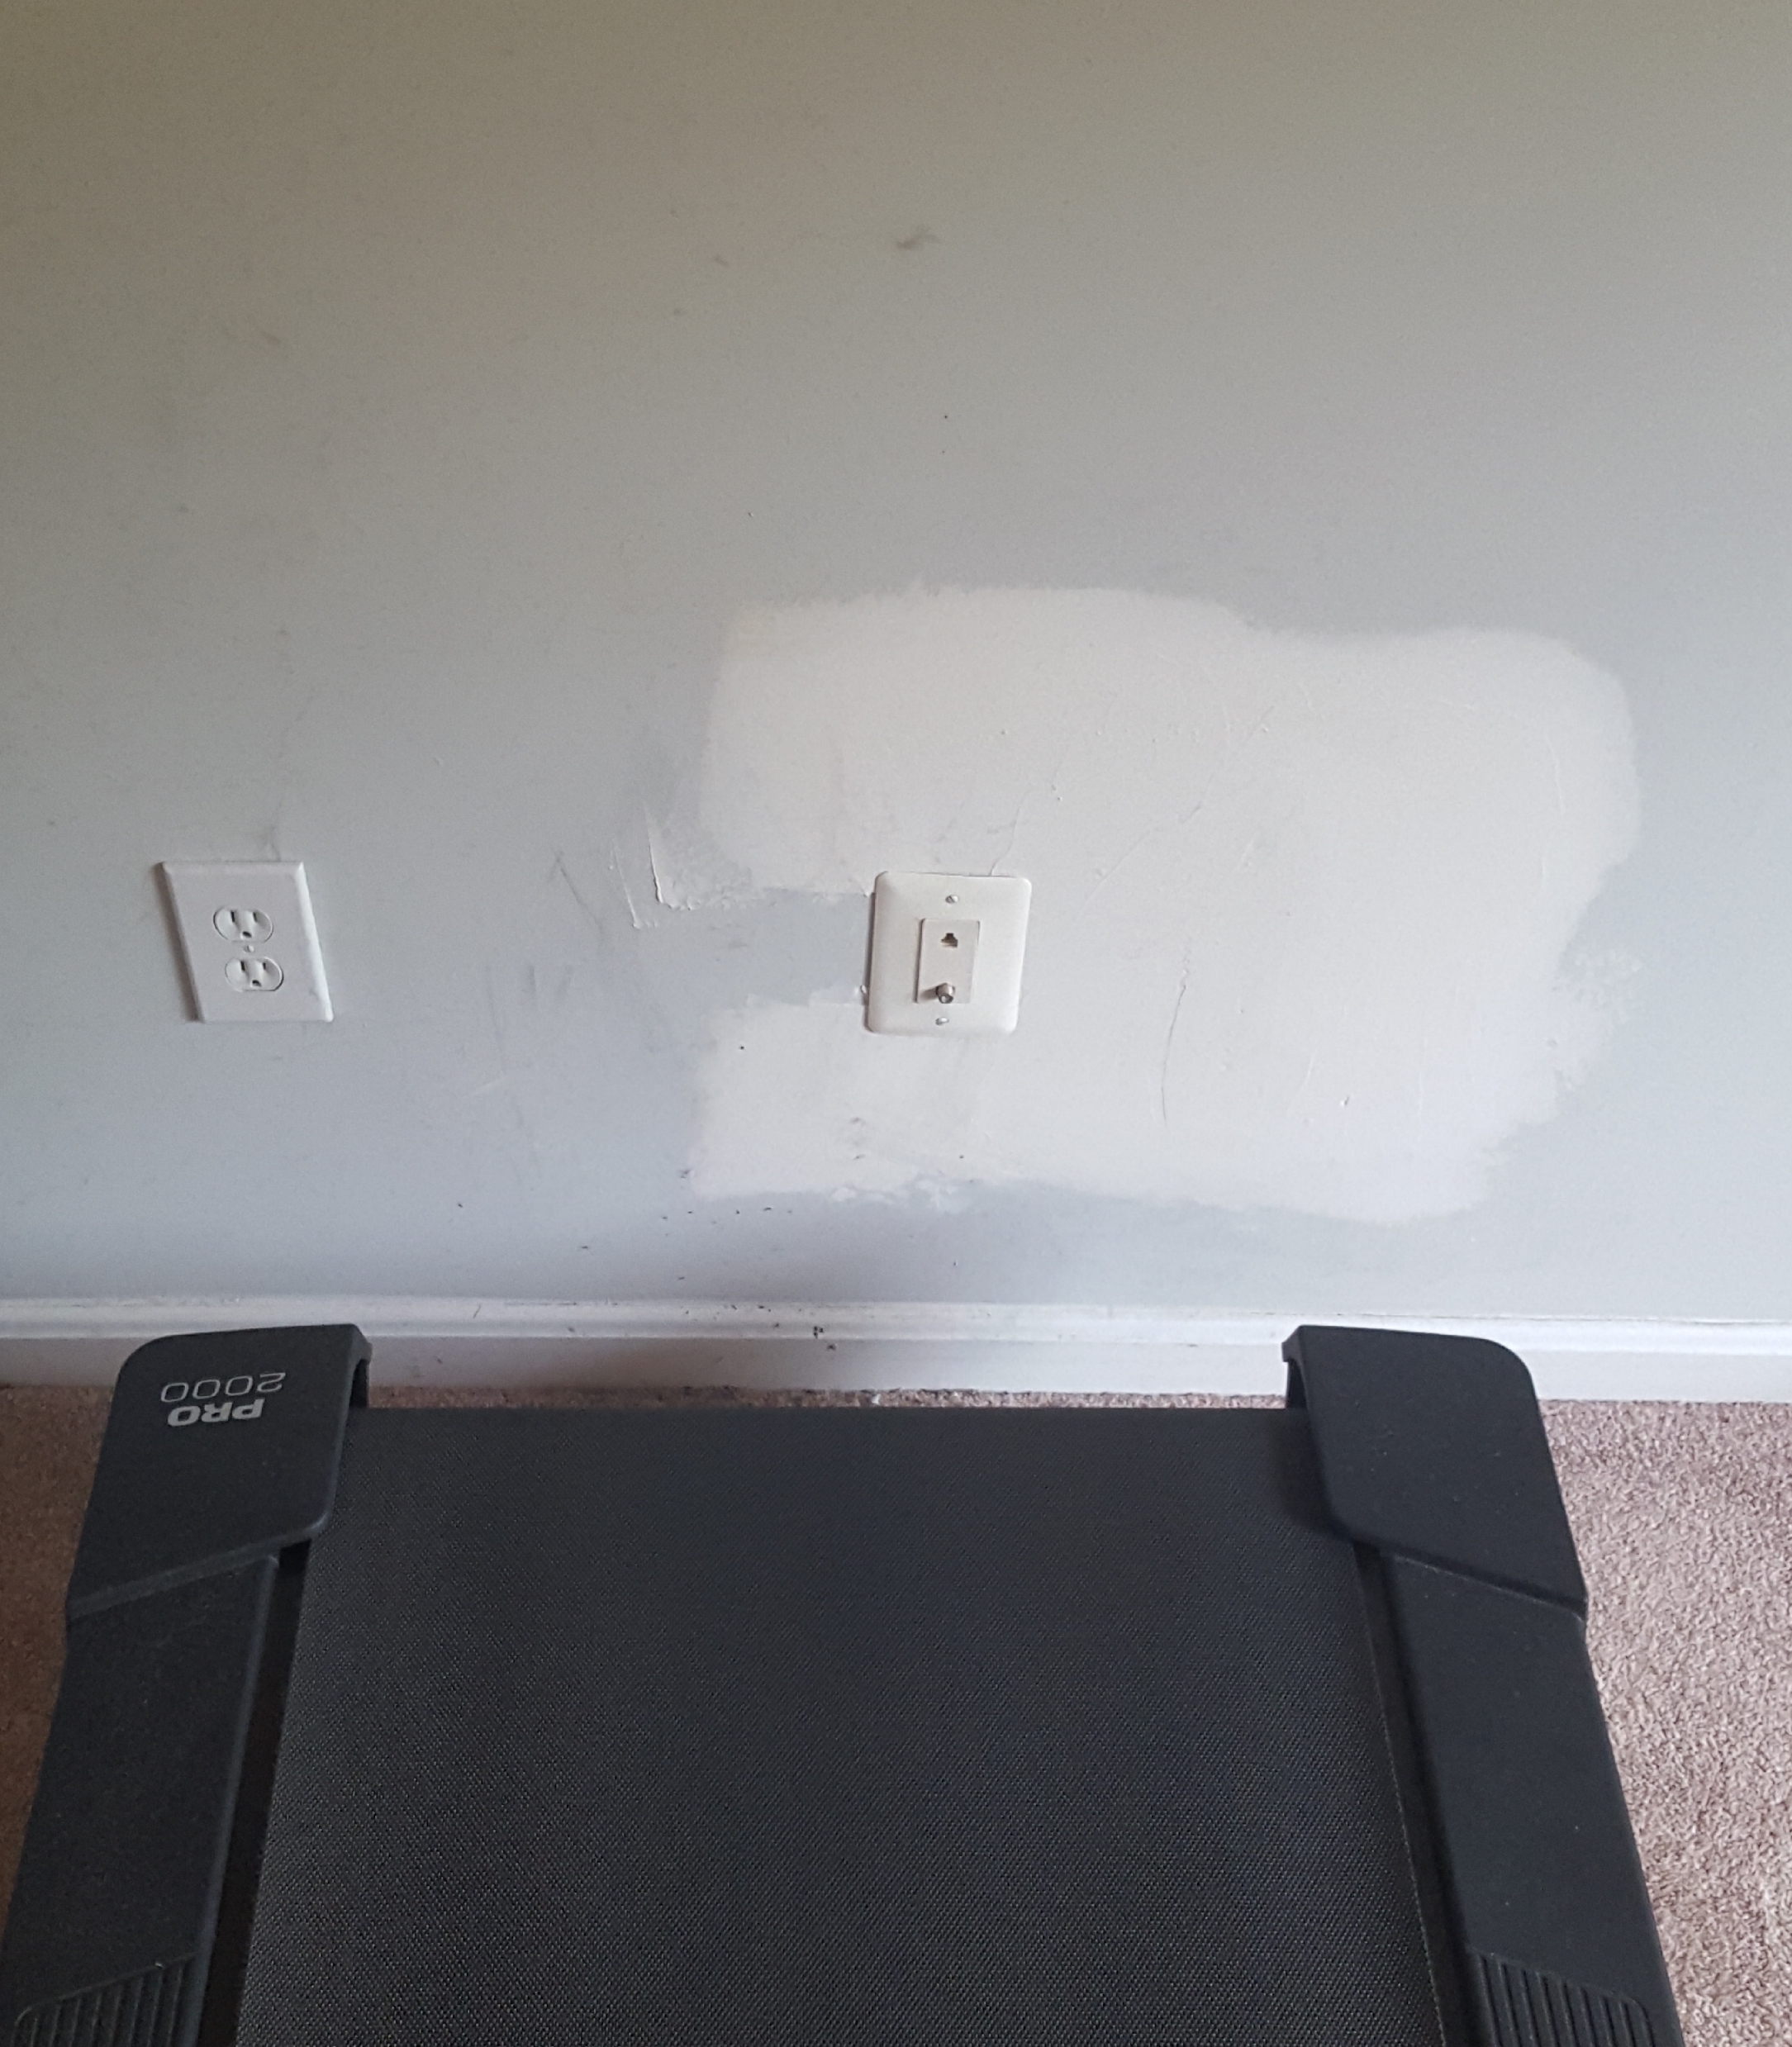 Drywall Patch